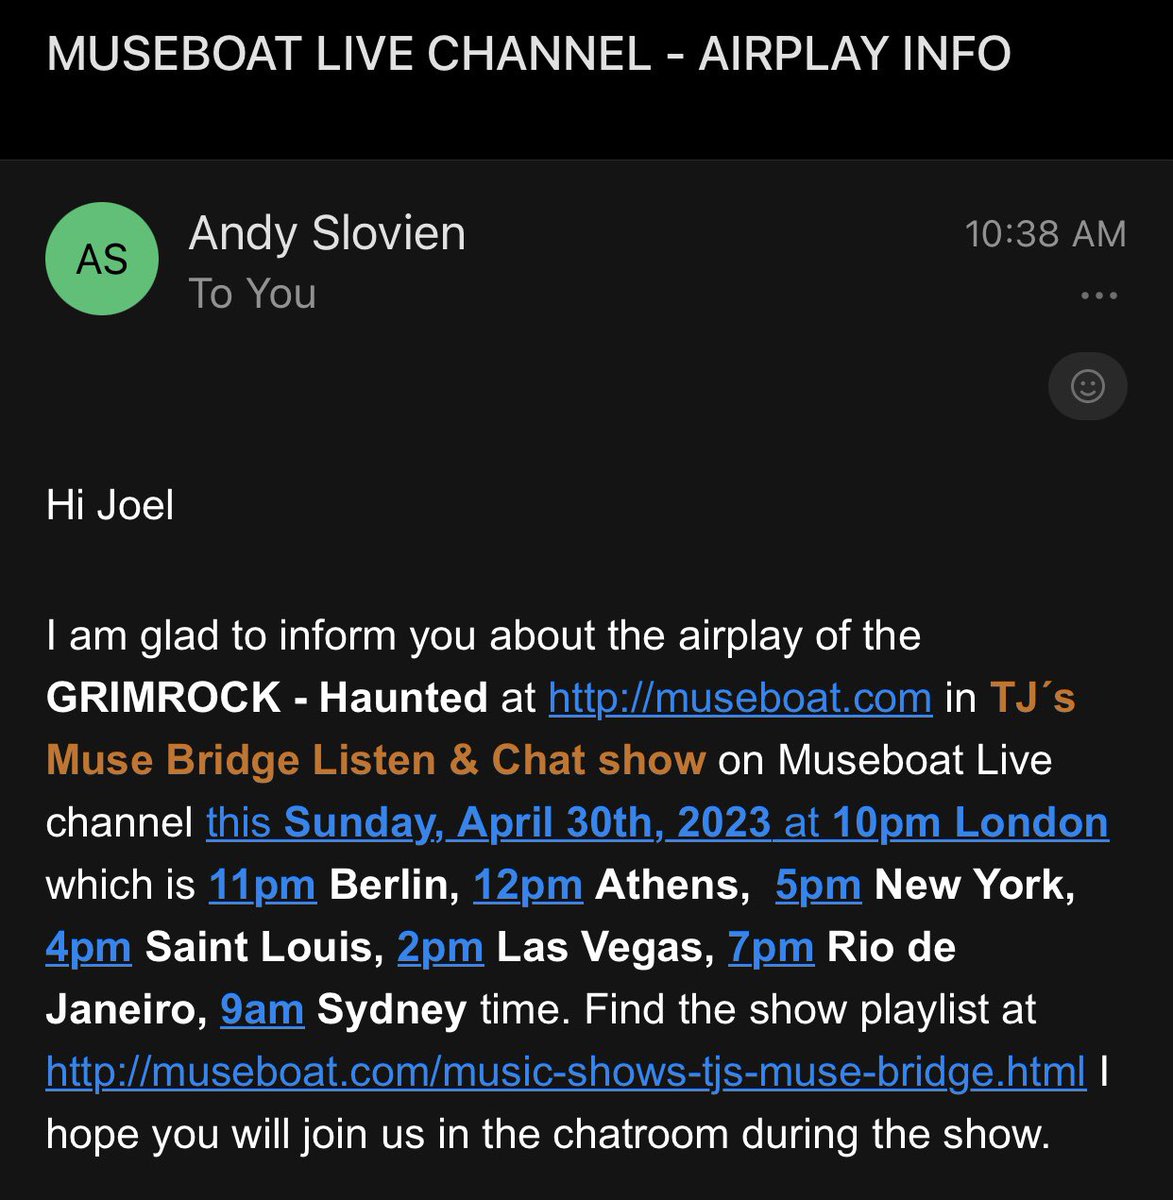 More and more email coming in! Thank you @museboatlive / TJ's MuseBridge on Museboat Live for spinning Haunted! See you Sunday! Rock on!